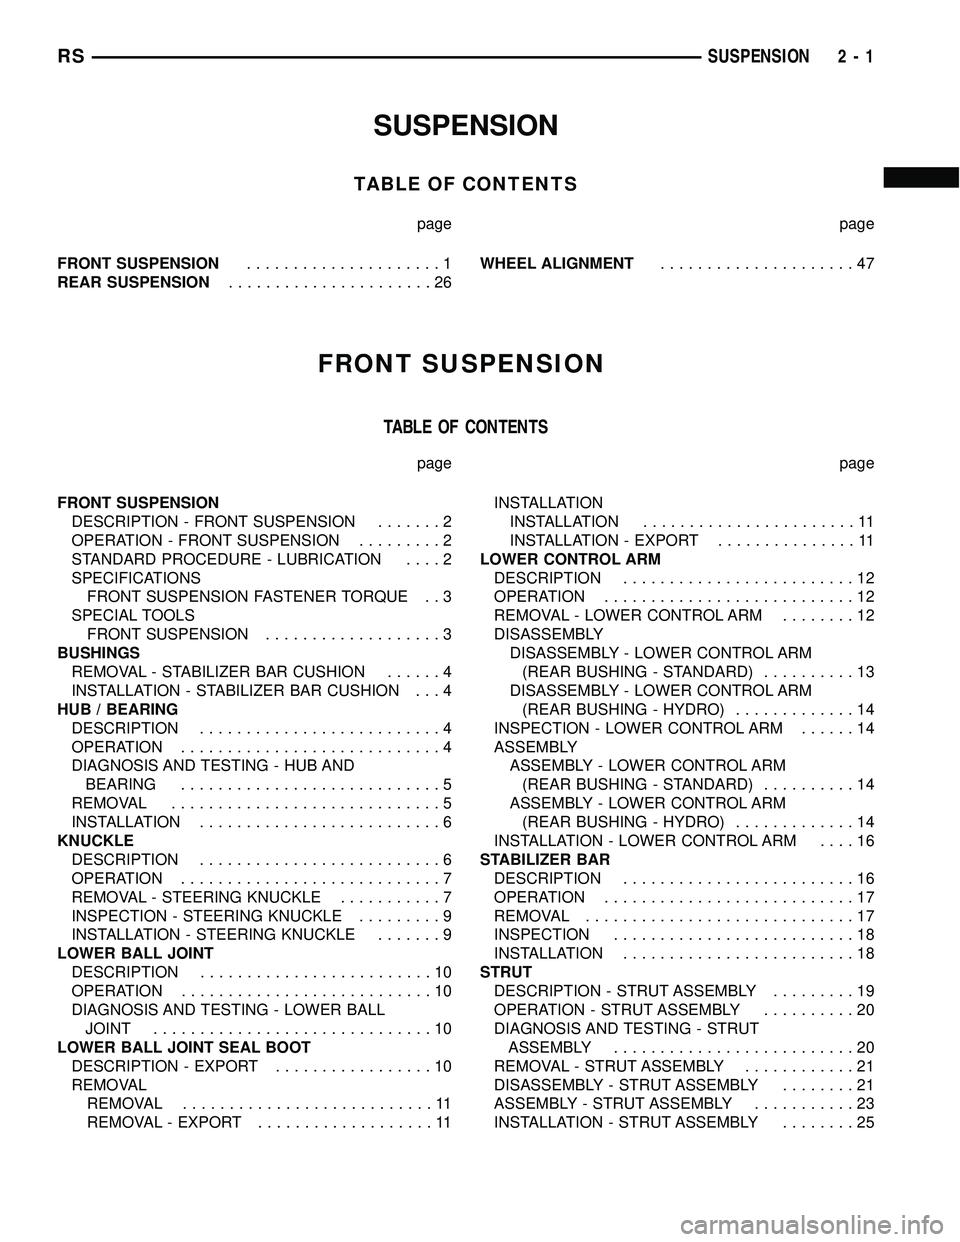 DODGE TOWN AND COUNTRY 2004 Workshop Manual SUSPENSION
TABLE OF CONTENTS
page page
FRONT SUSPENSION.....................1
REAR SUSPENSION......................26WHEEL ALIGNMENT.....................47
FRONT SUSPENSION
TABLE OF CONTENTS
page page